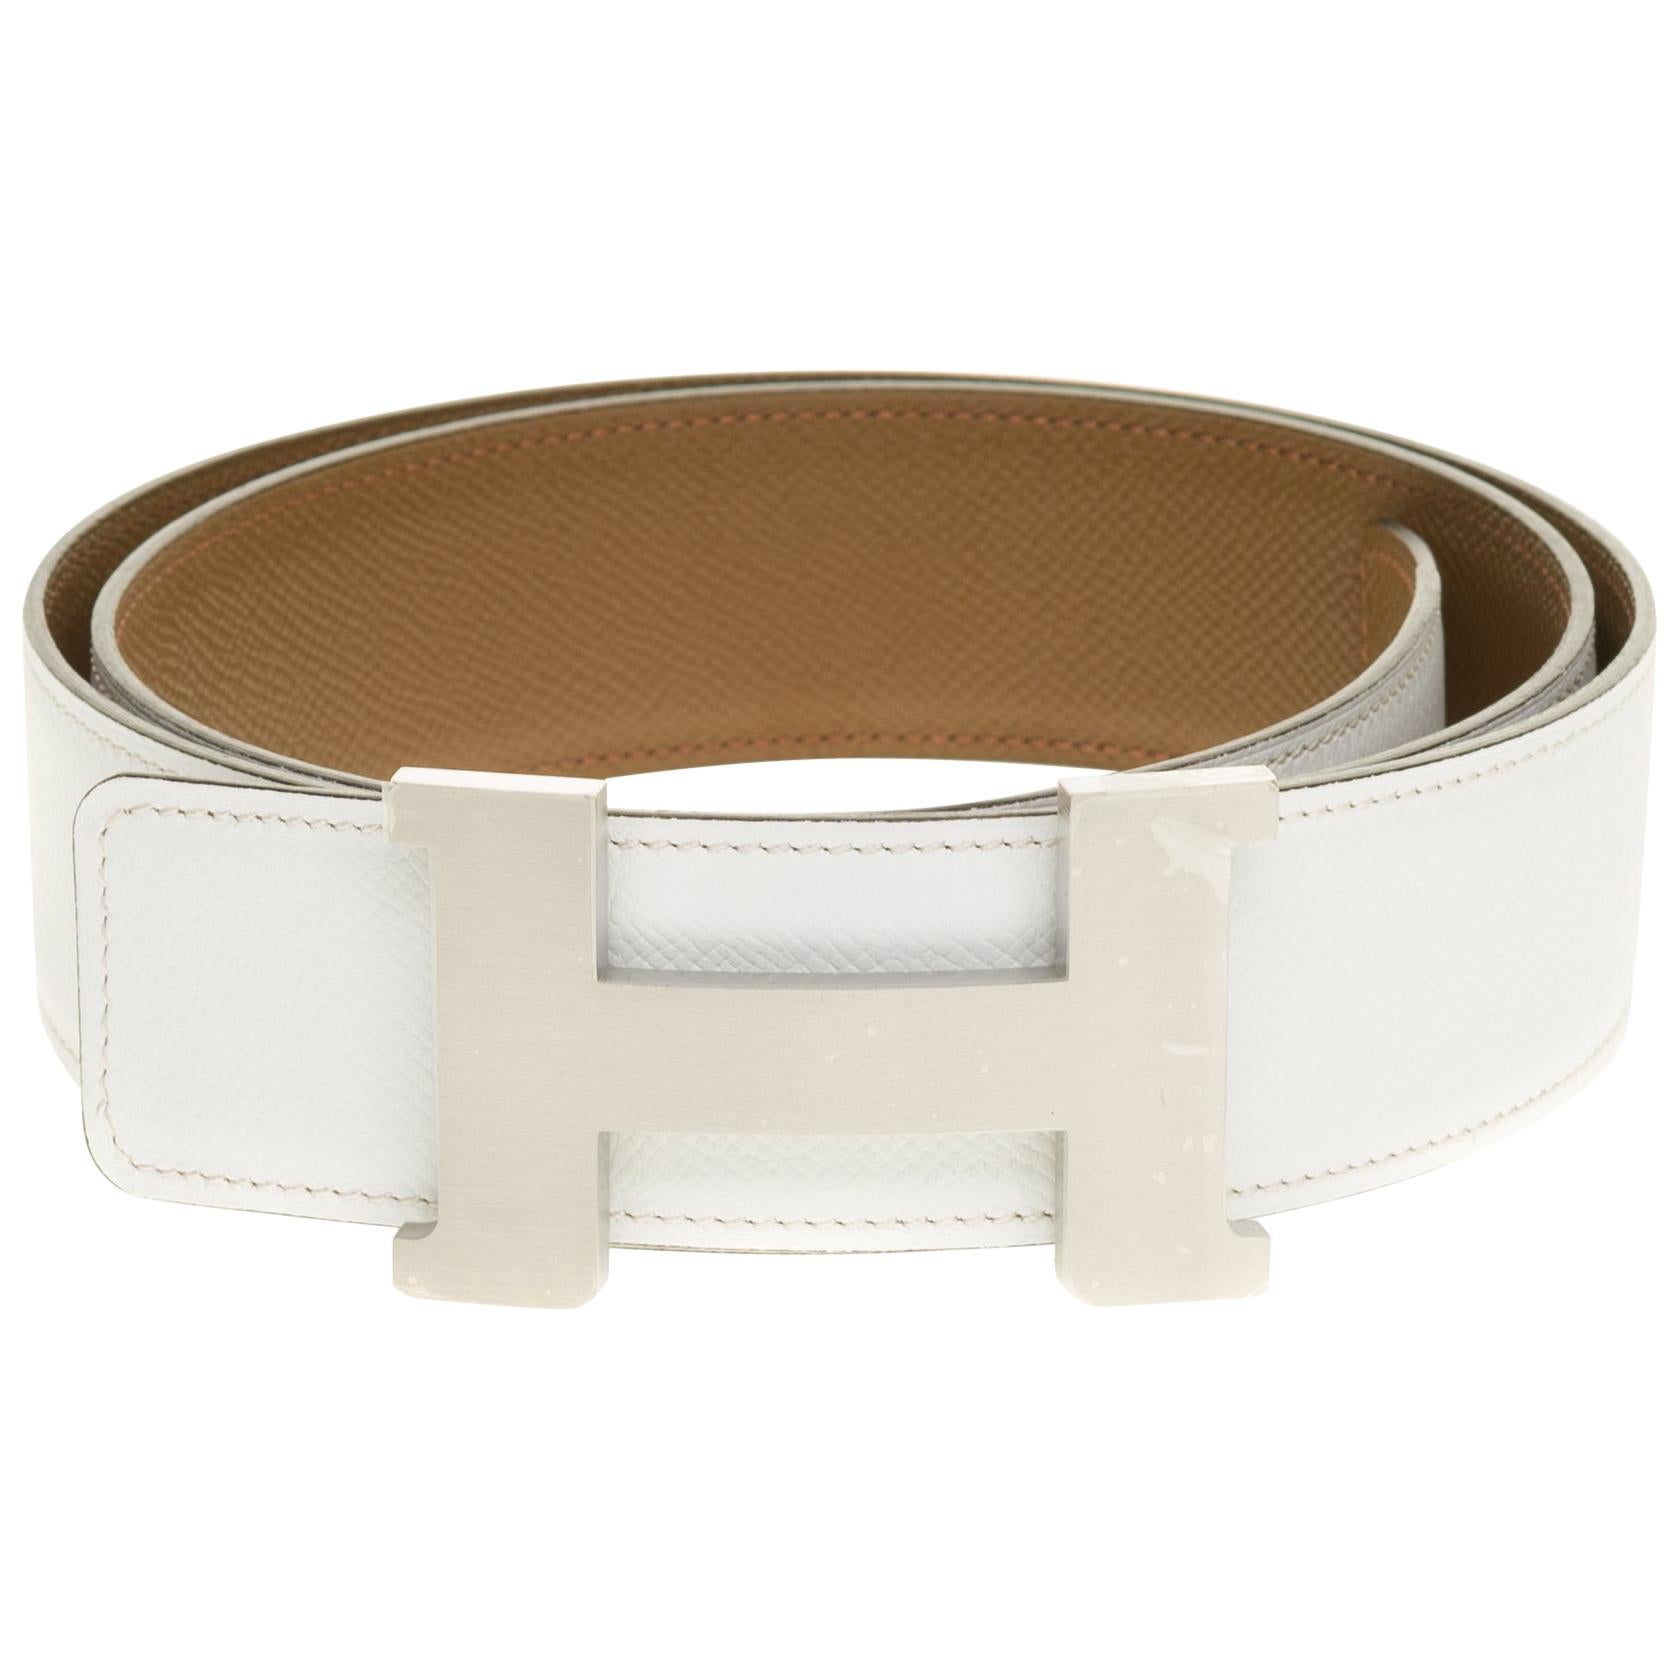 Brand new/Hermès Constance belt 40 mm reverse in epsom White/Taupe leather 